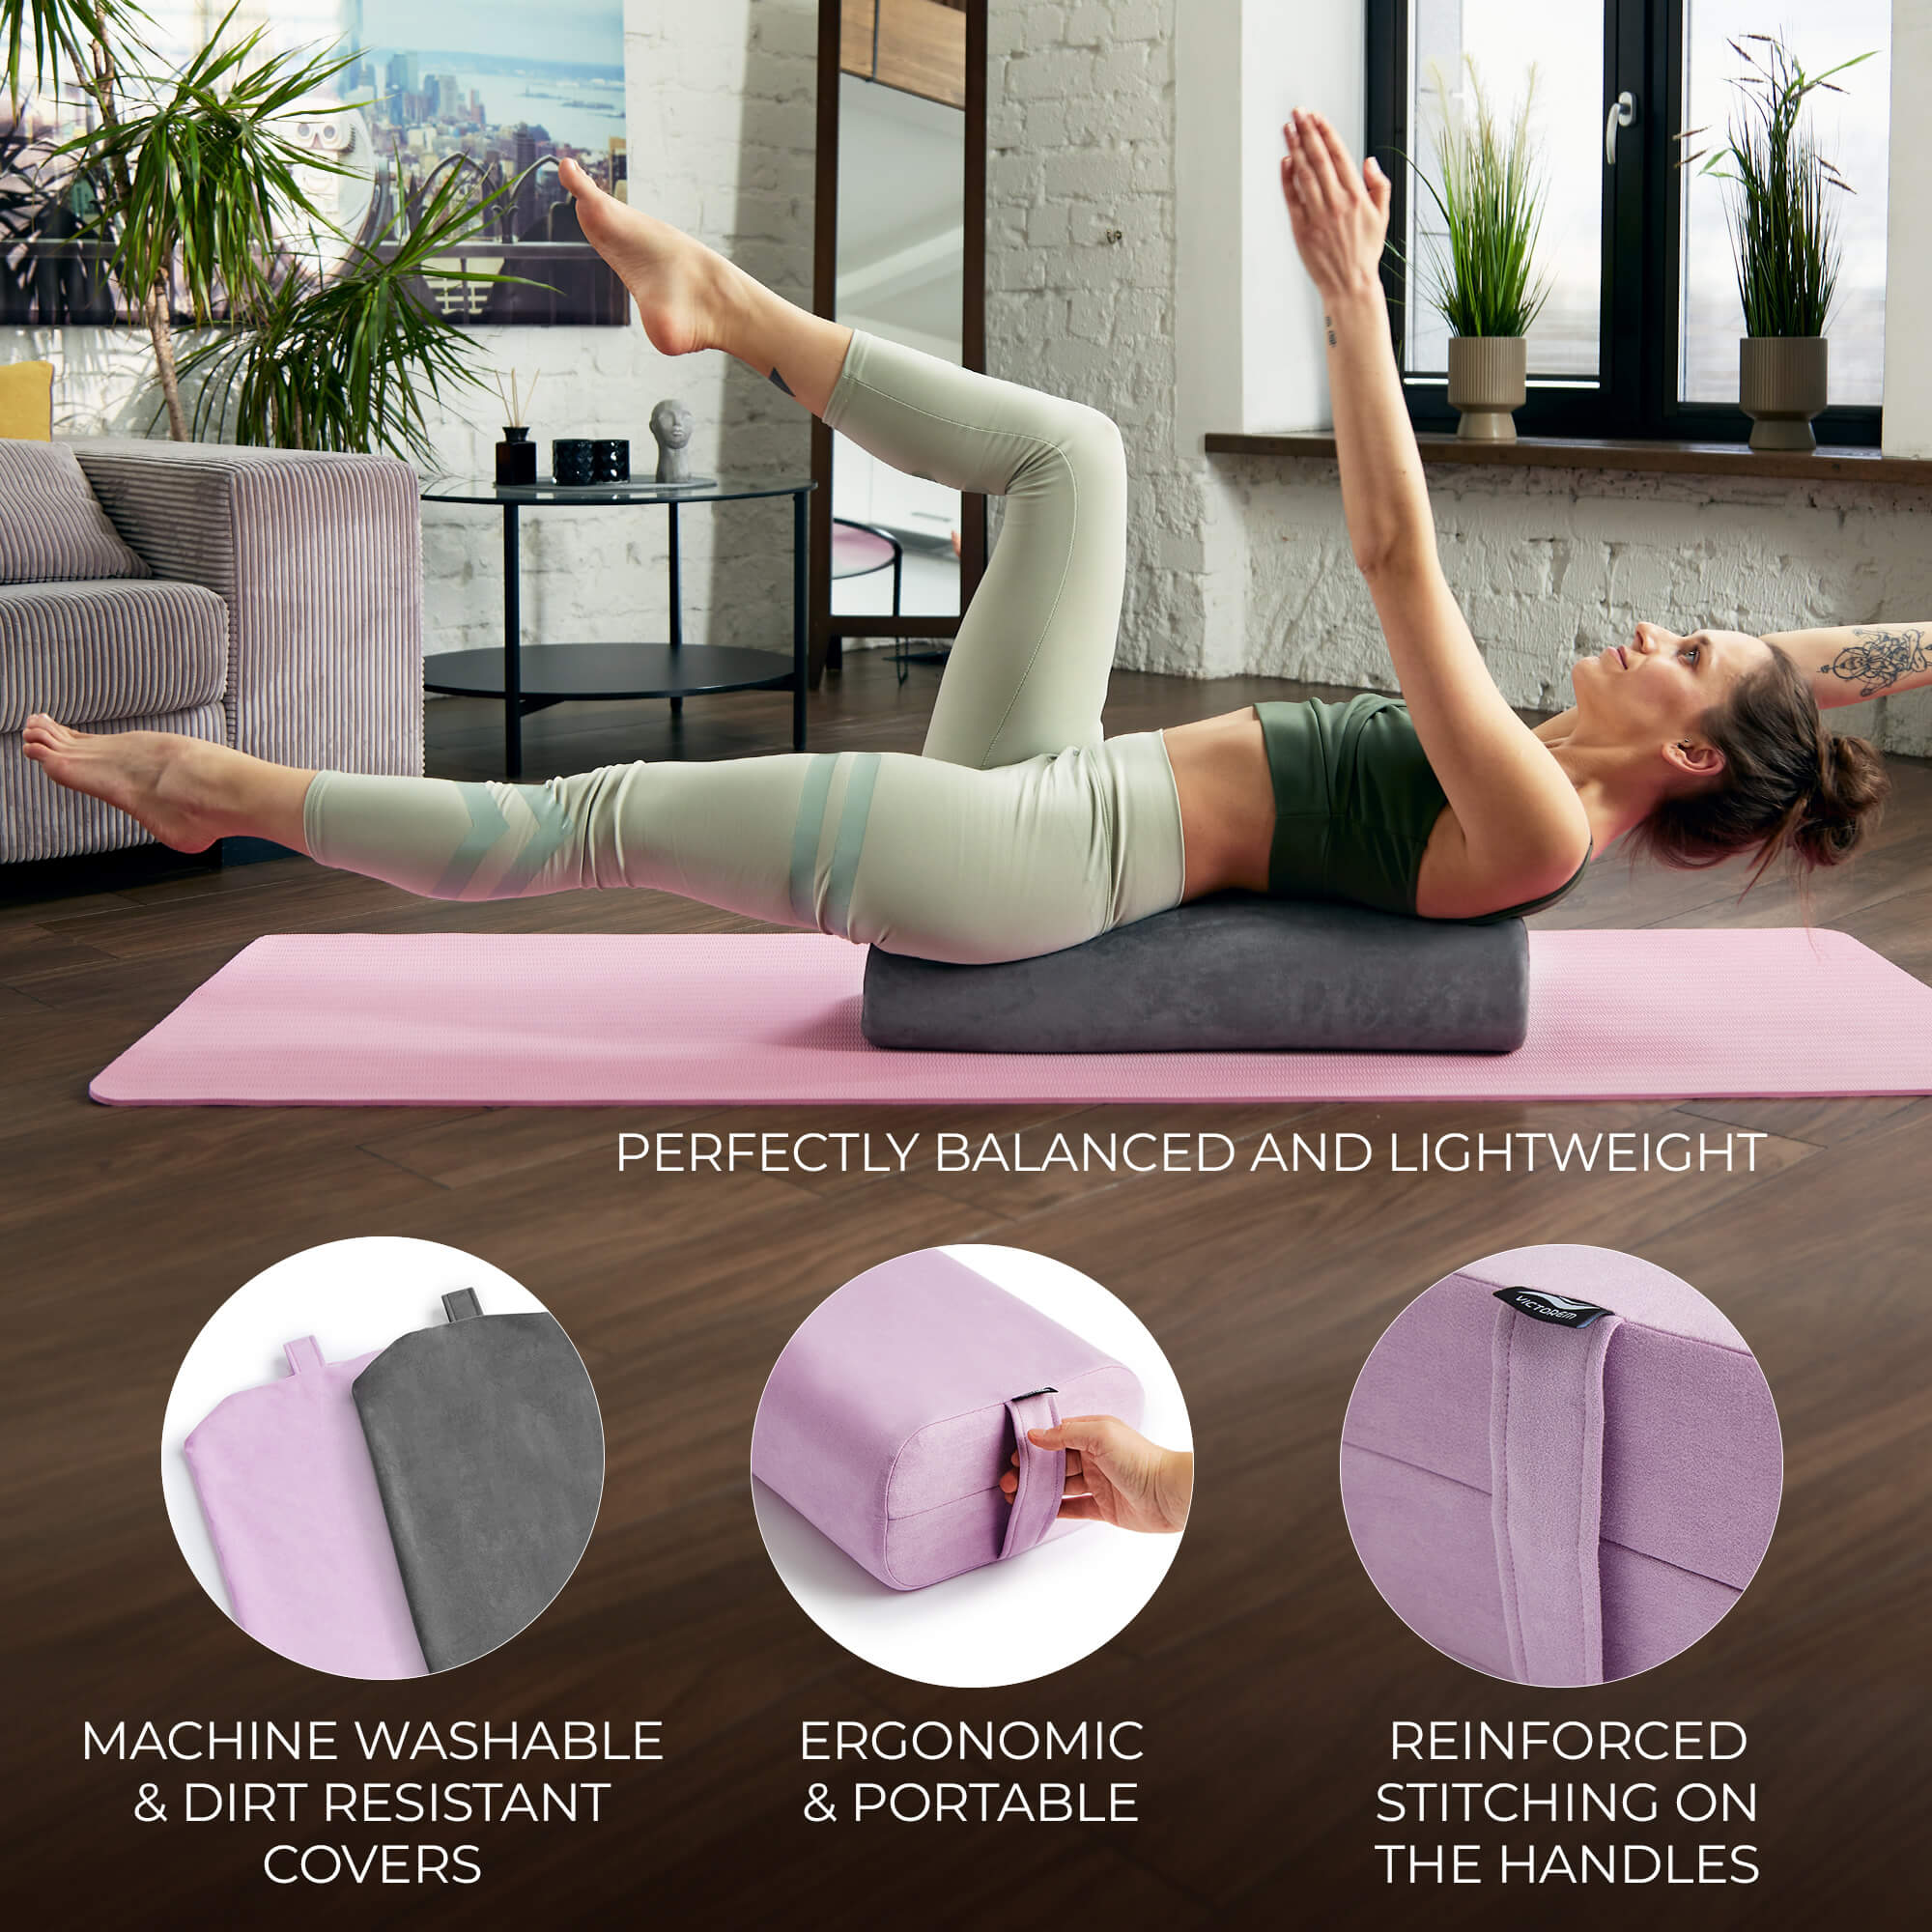 How to Use a Yoga Bolster